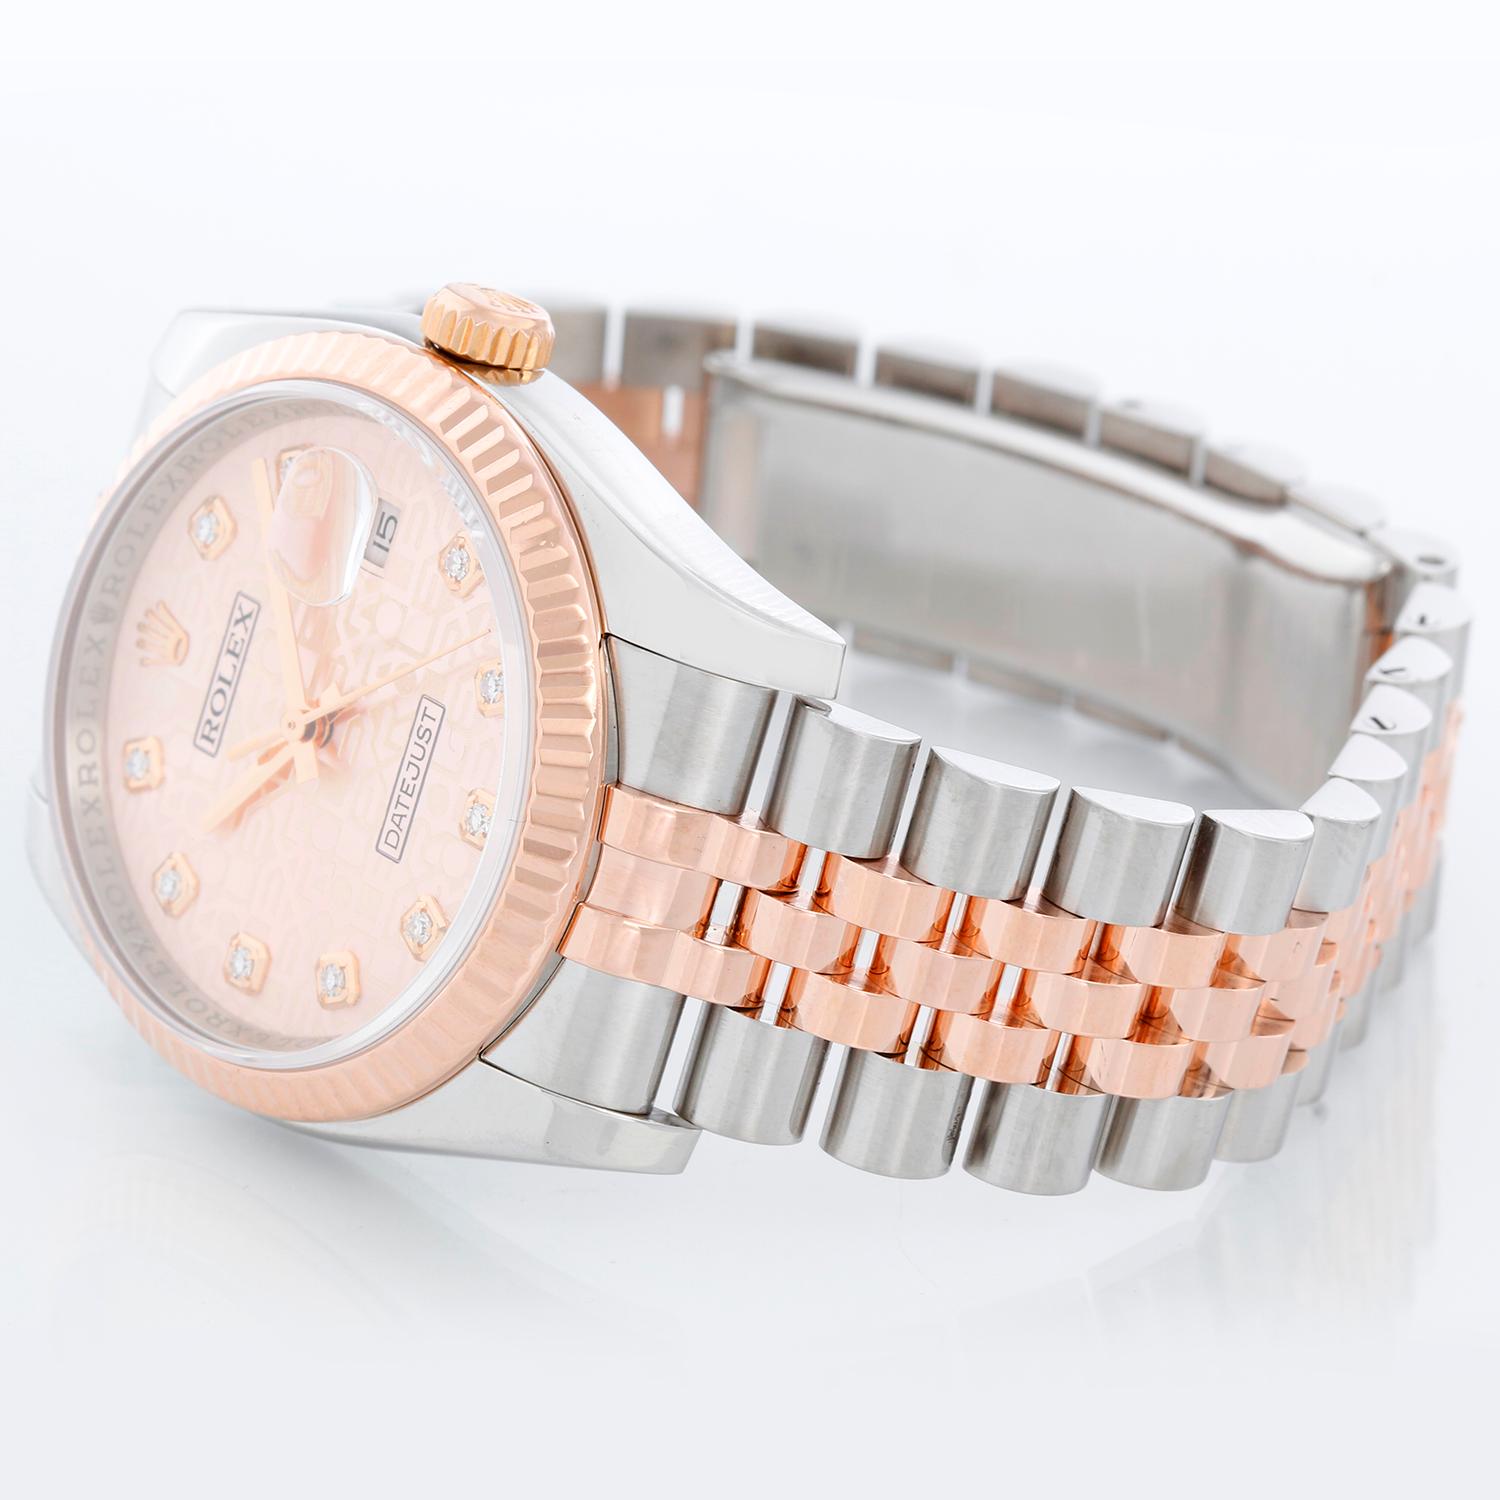 Rolex Datejust Men's 2-Tone Steel/Rose Gold Watch 116231 - Automatic winding, 31 jewels, Quickset, sapphire crystal. Stainless steel case with 18k rose gold fluted bezel (36mm diameter). Rose gold jubilee diamond dial. Stainless steel and 18k rose